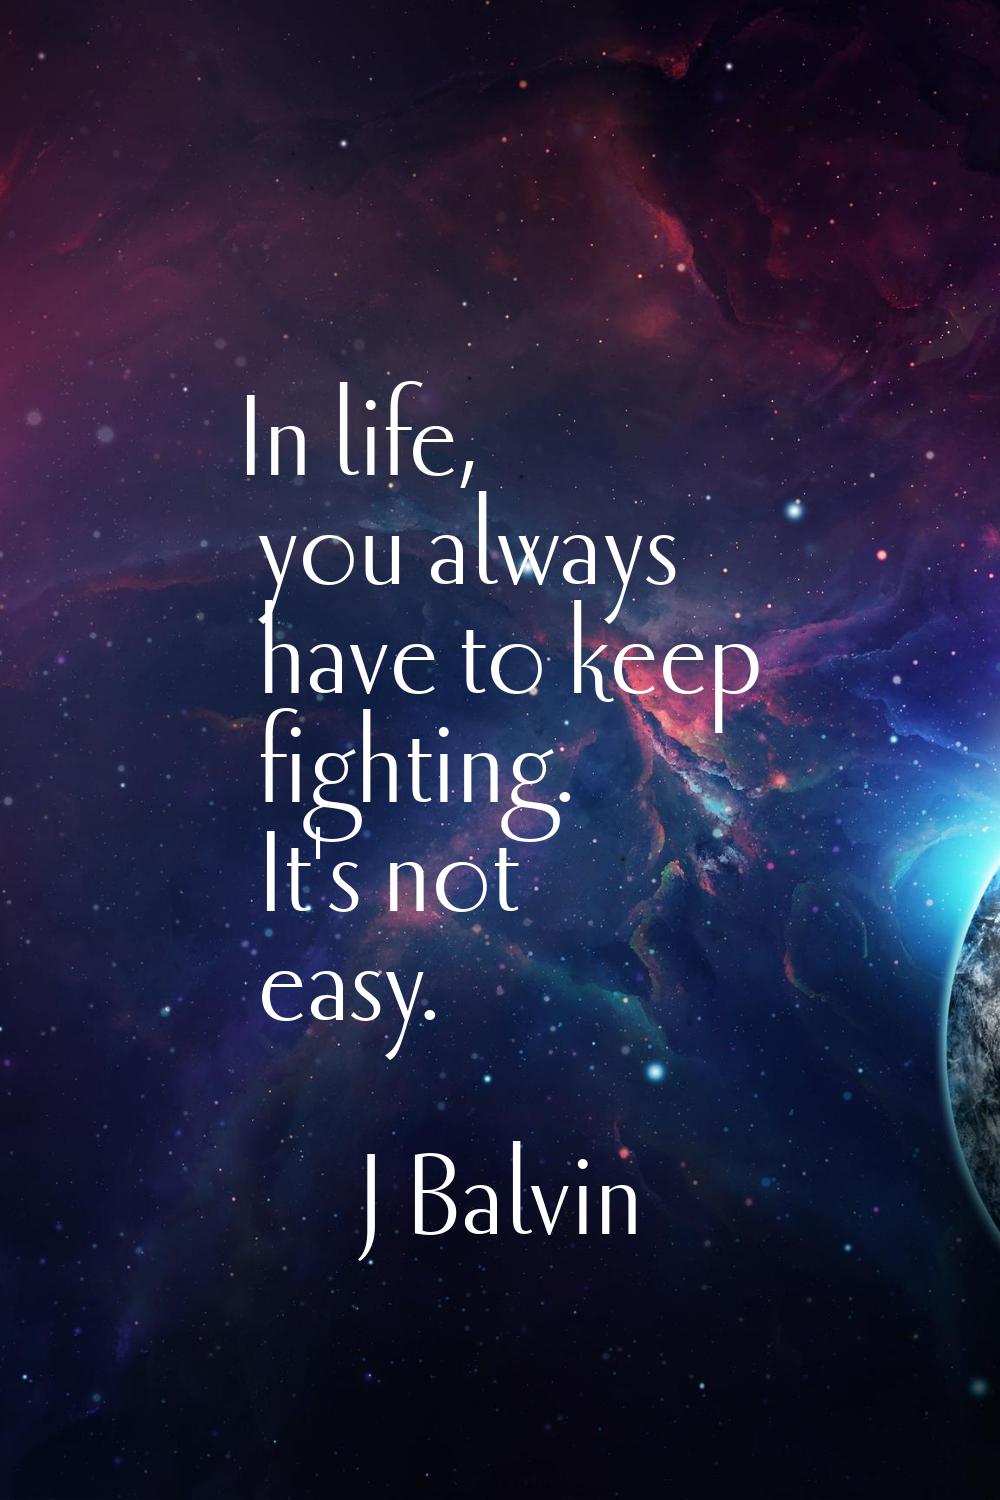 In life, you always have to keep fighting. It's not easy.